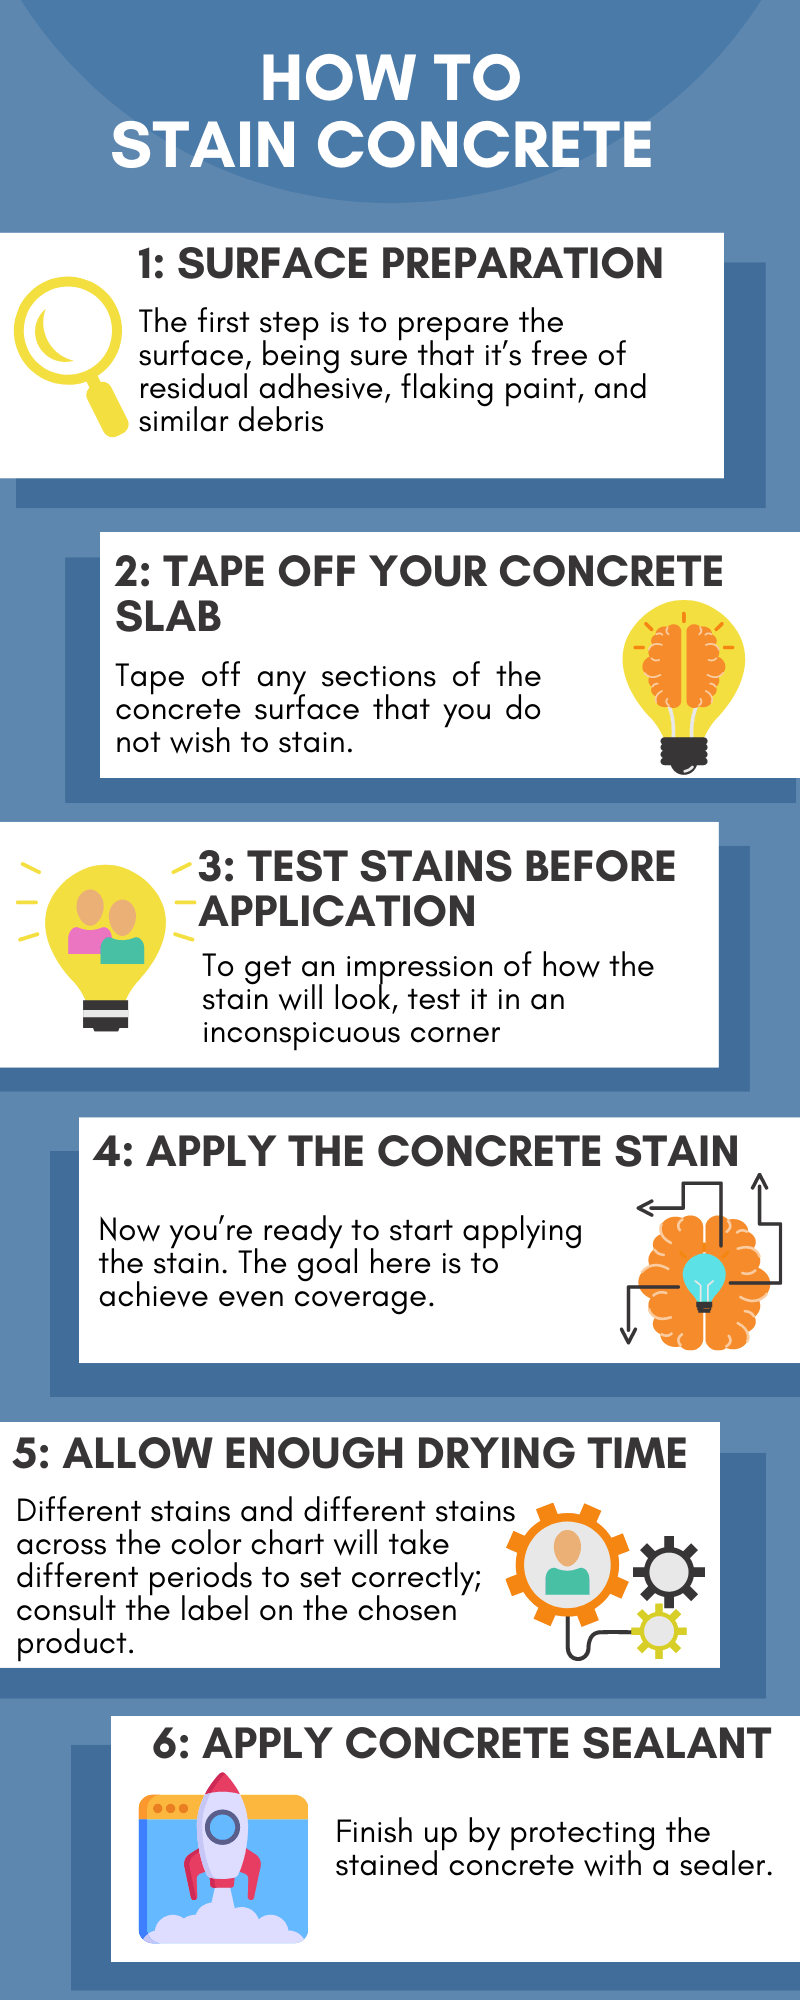 How To Stain Concrete Infographic